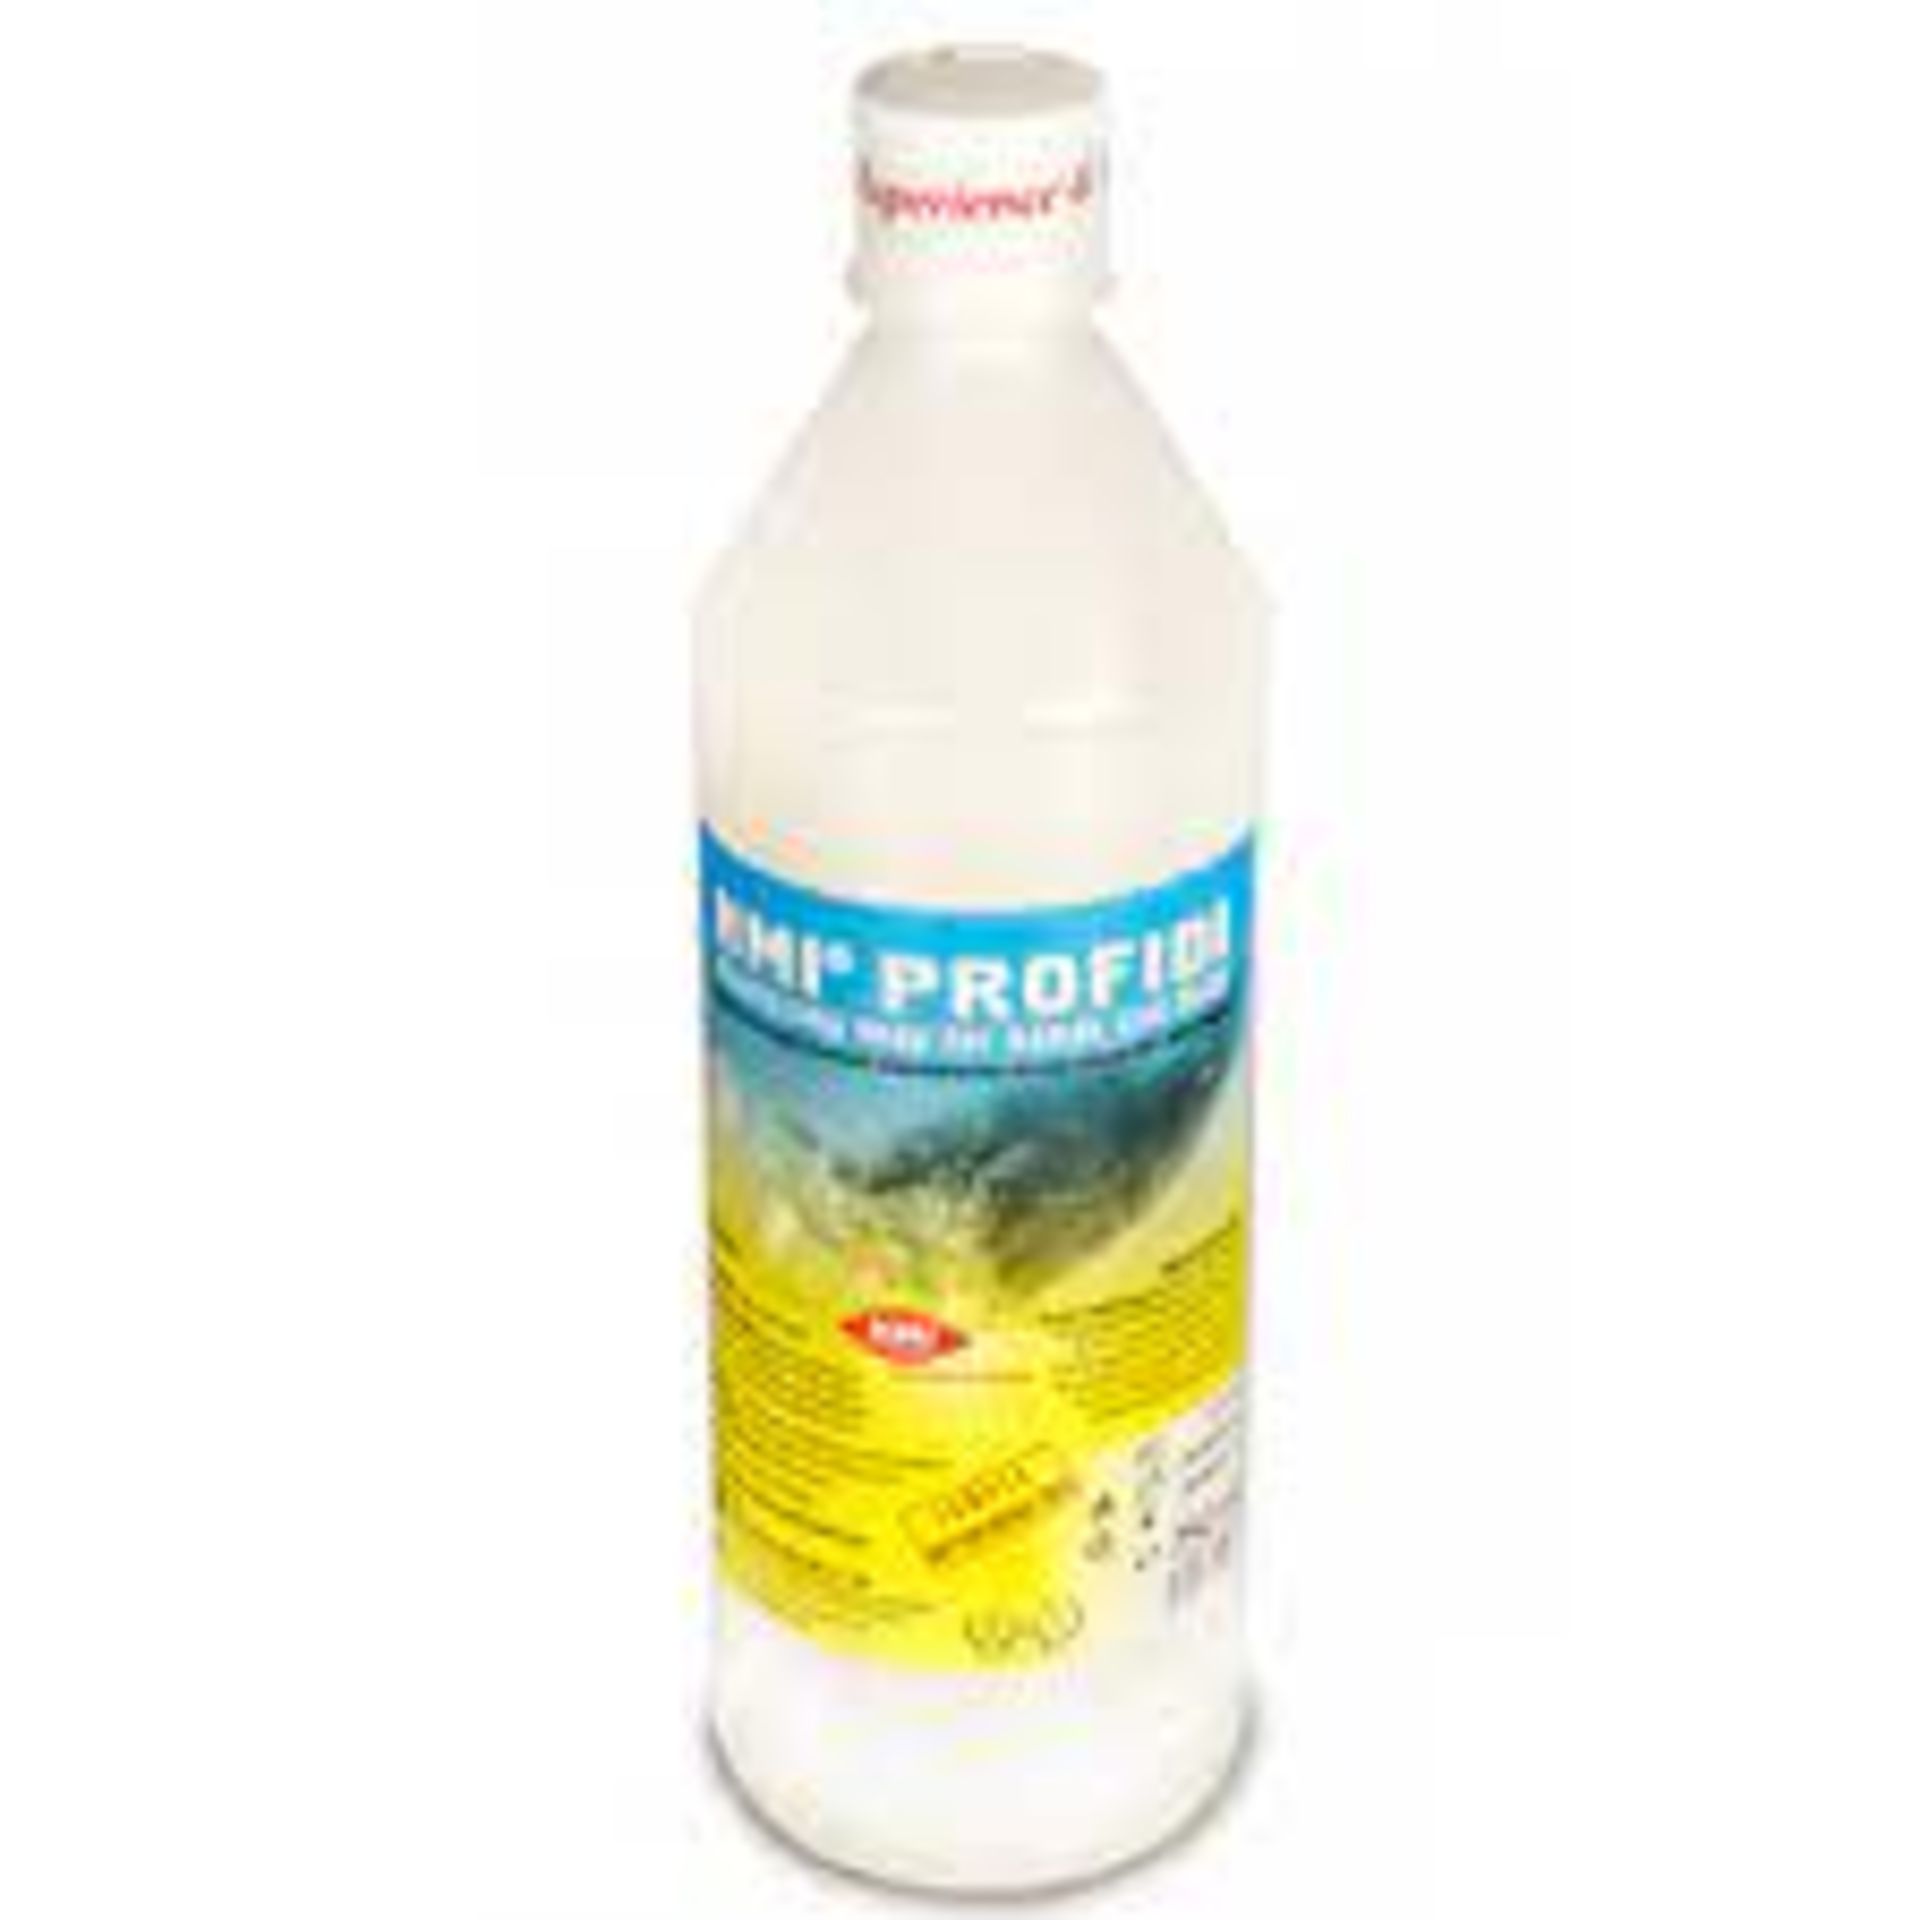 50 x Profidi Liquid Soap Disinfectant For Hands and Skin - Image 5 of 9